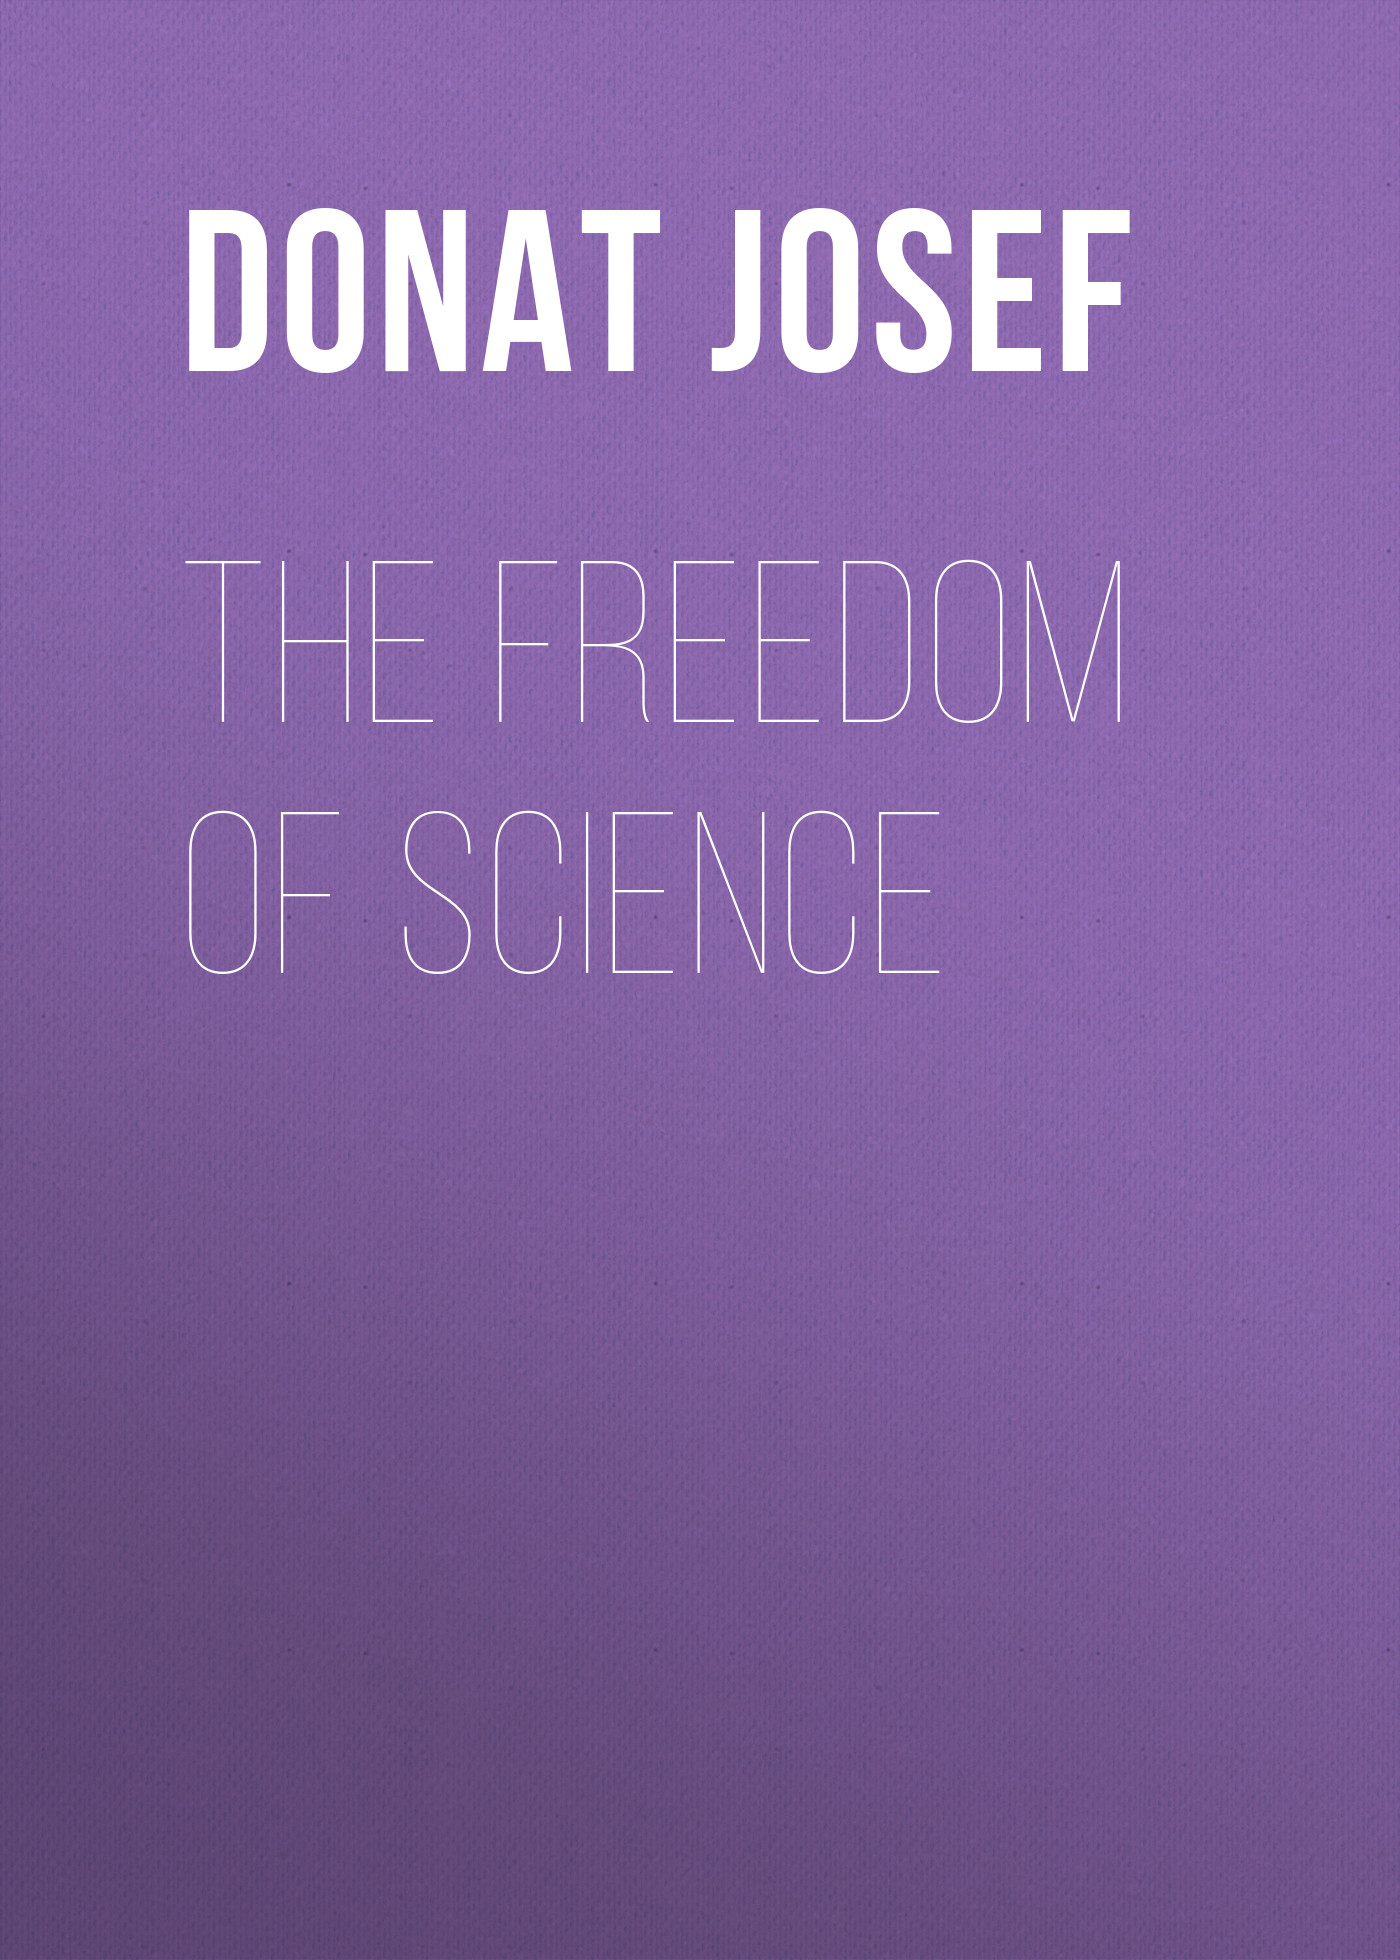 The Freedom of Science